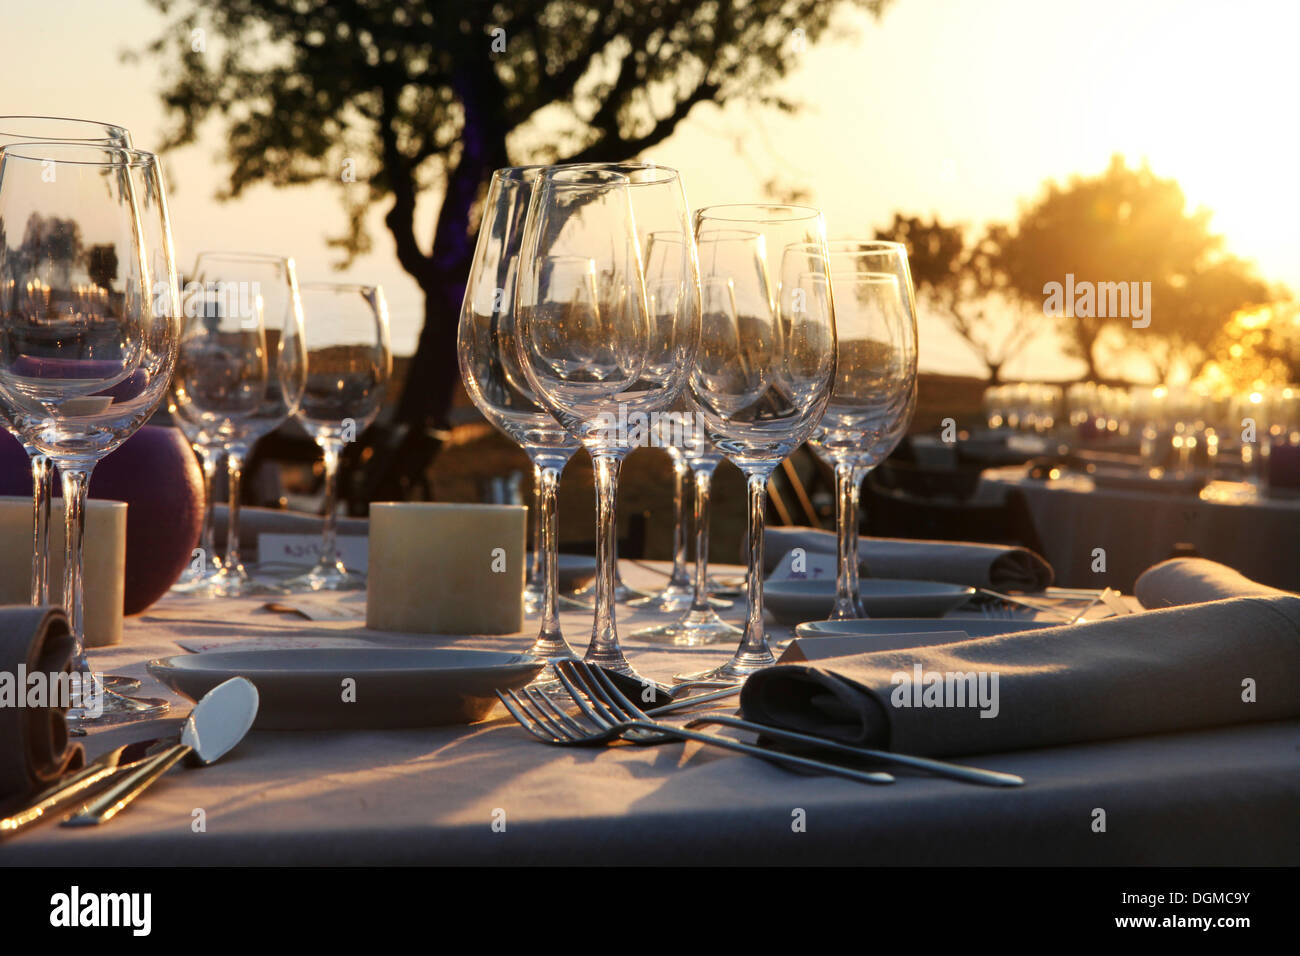 Laid table at a wedding reception, in an olive orchard at sunset, Majorca, Spain, Europe Stock Photo